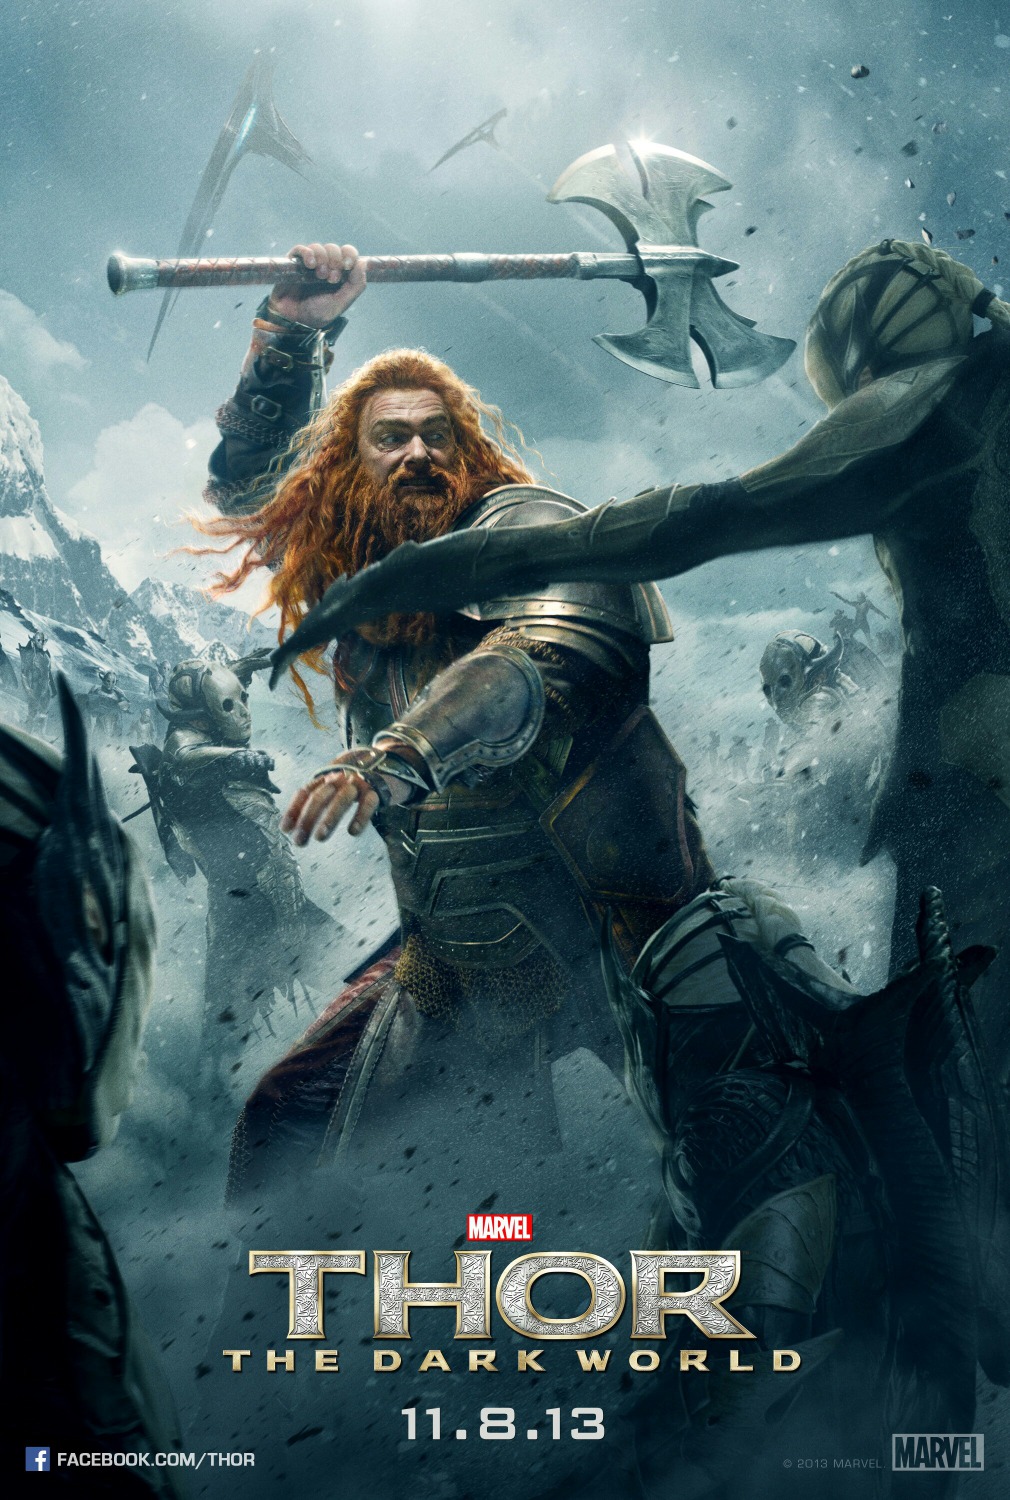 Extra Large Movie Poster Image for Thor: The Dark World (#17 of 19)